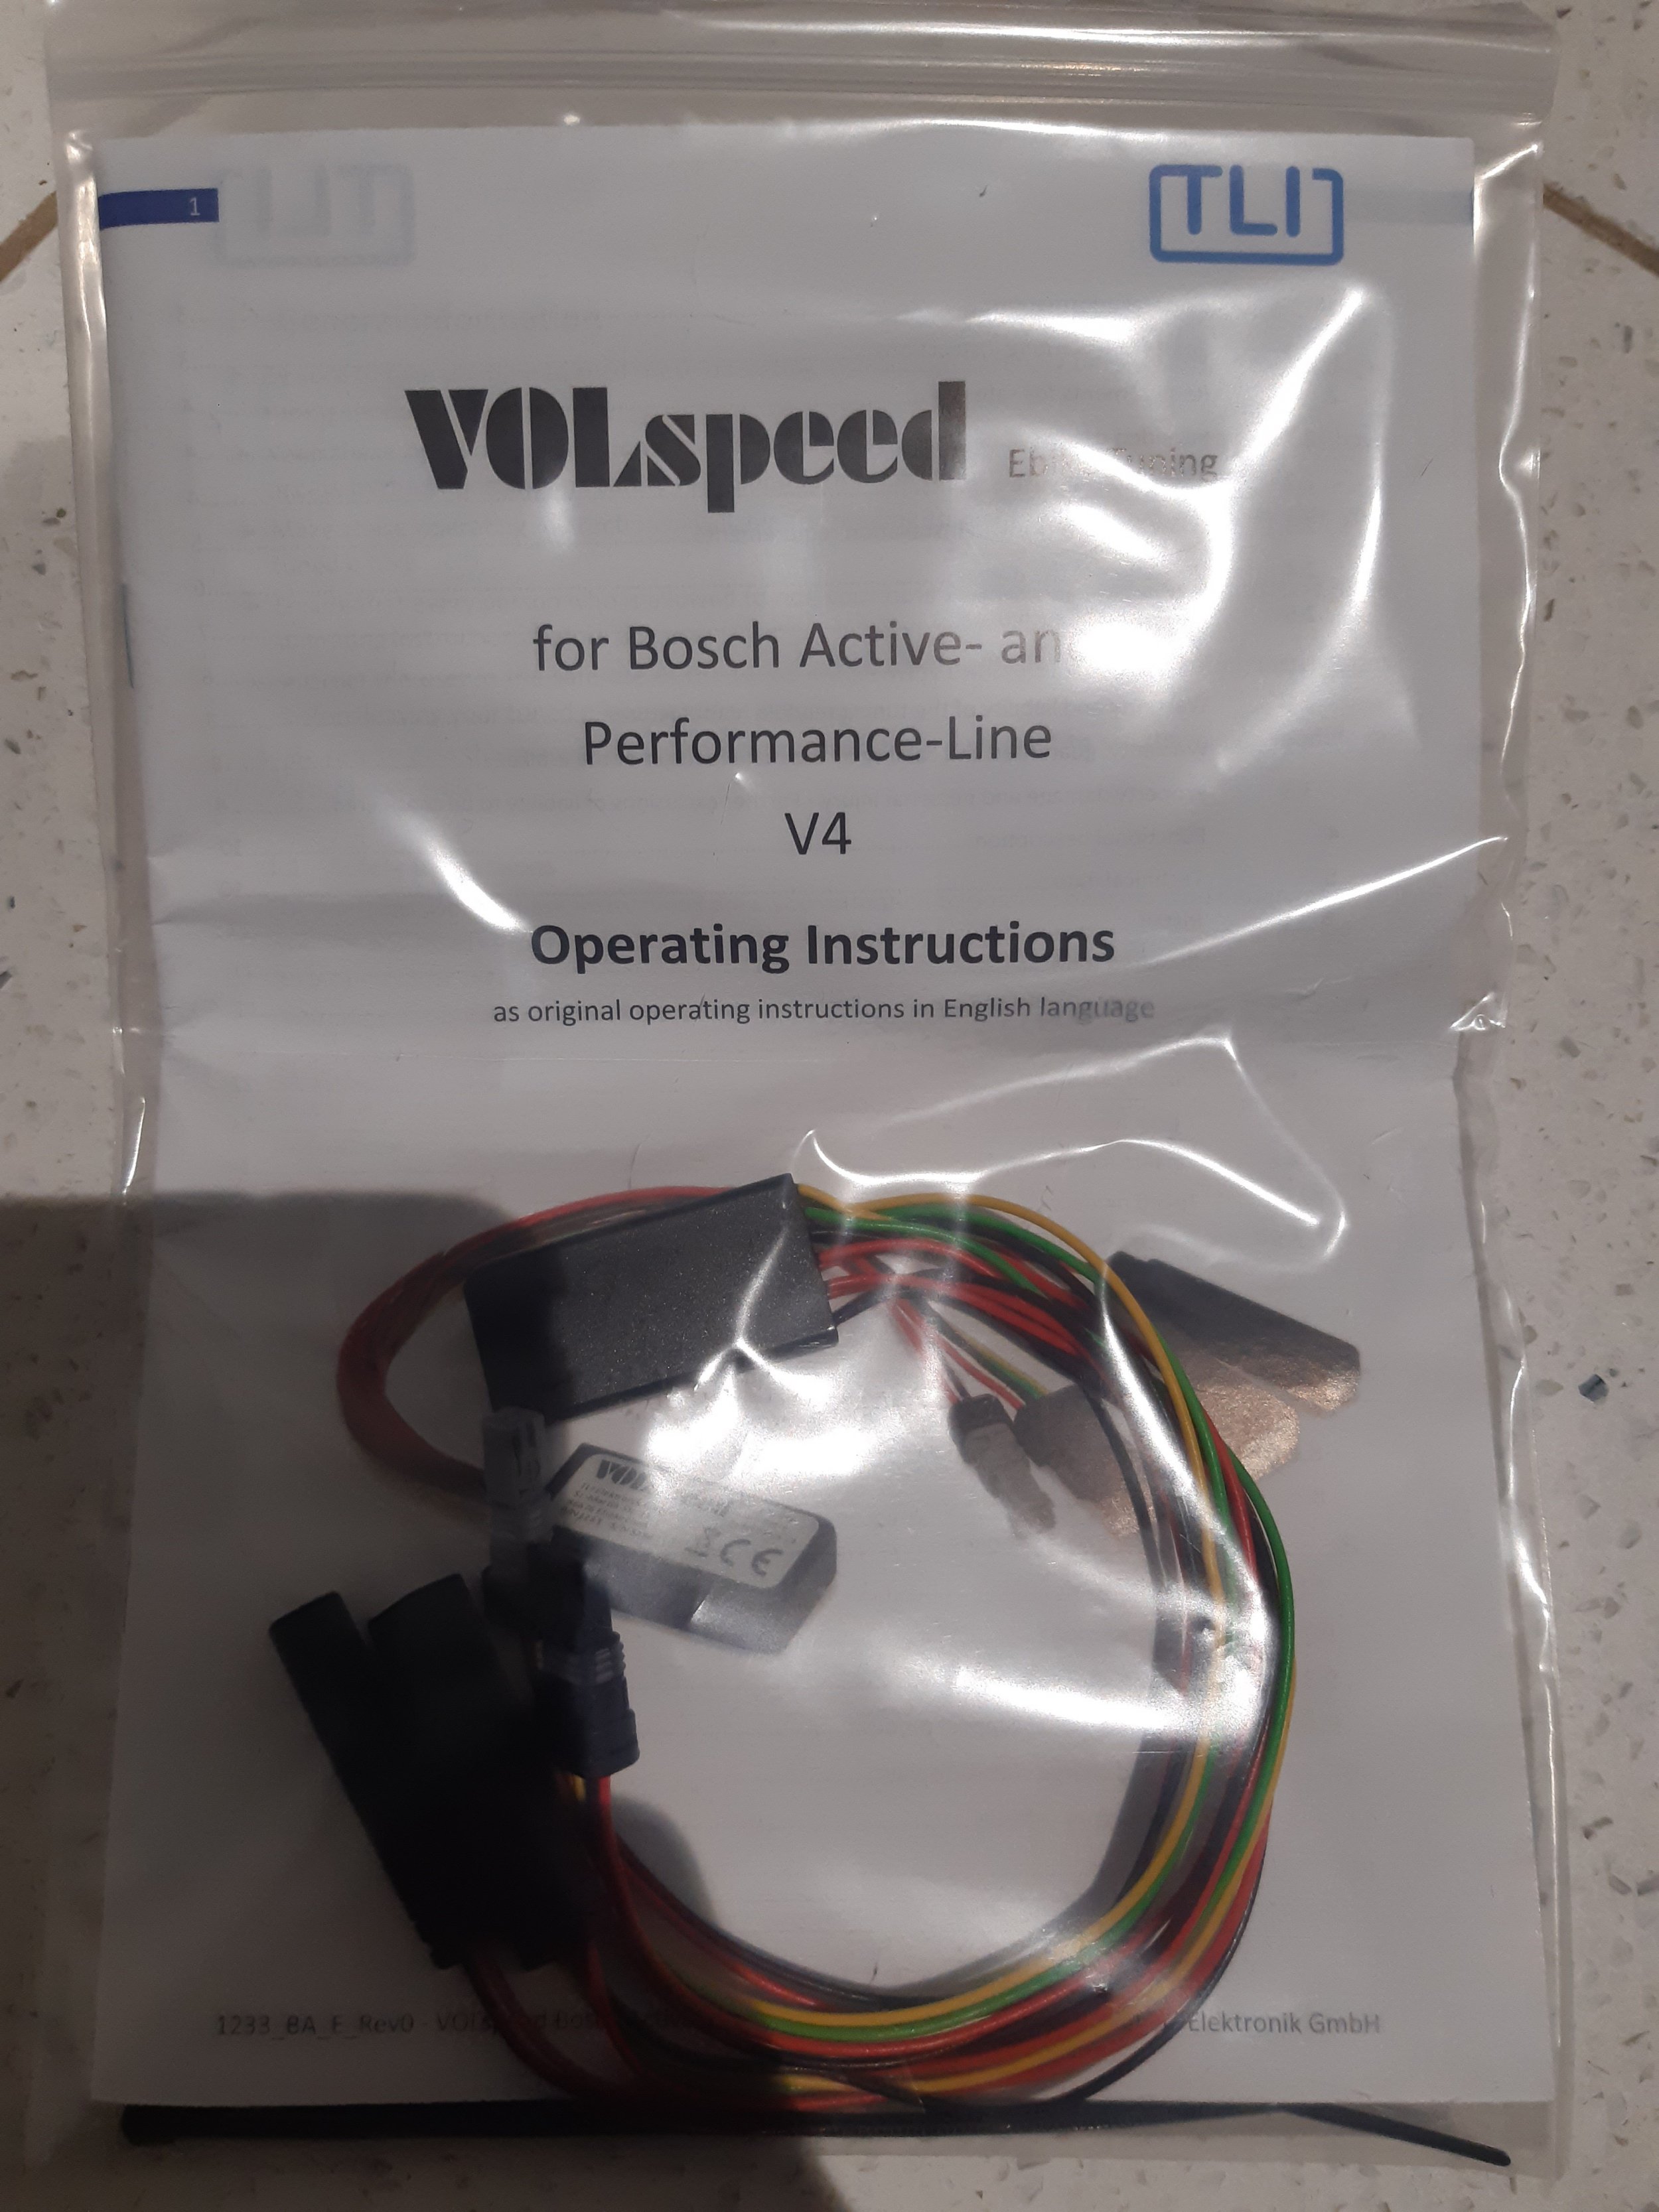 Wanted :Volspeed V4 for Bosch